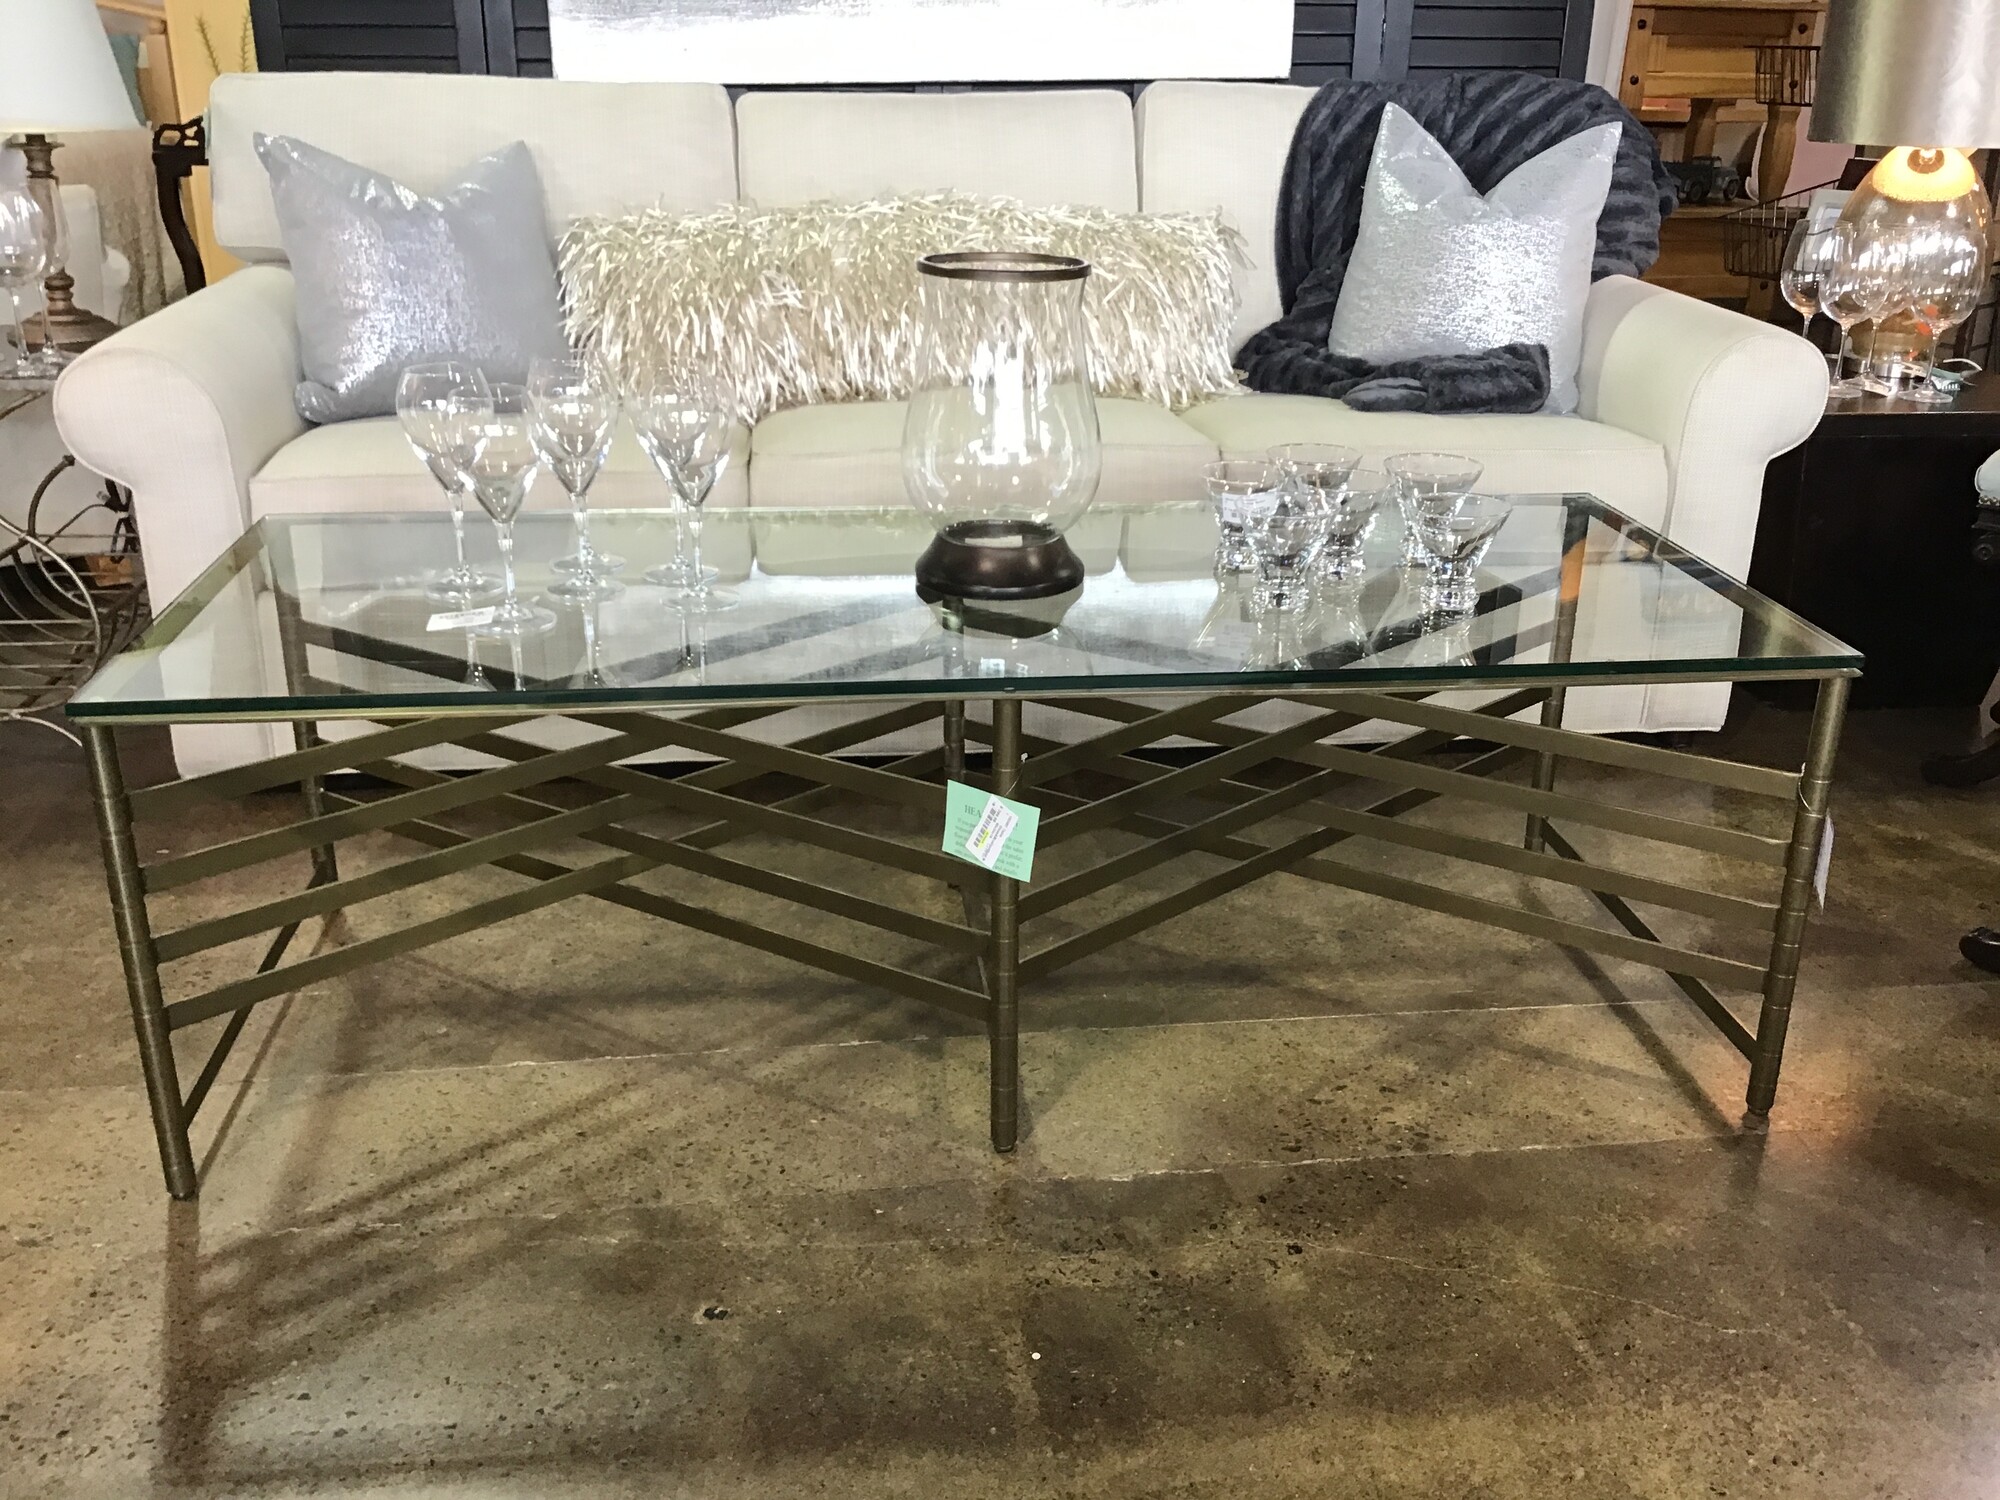 This beautiful coffee table from Arhaus Furniture features a modern brushed gold base and glass top. It is in excellent condition!
Dimensions are 60 in x 24 in x 19 in